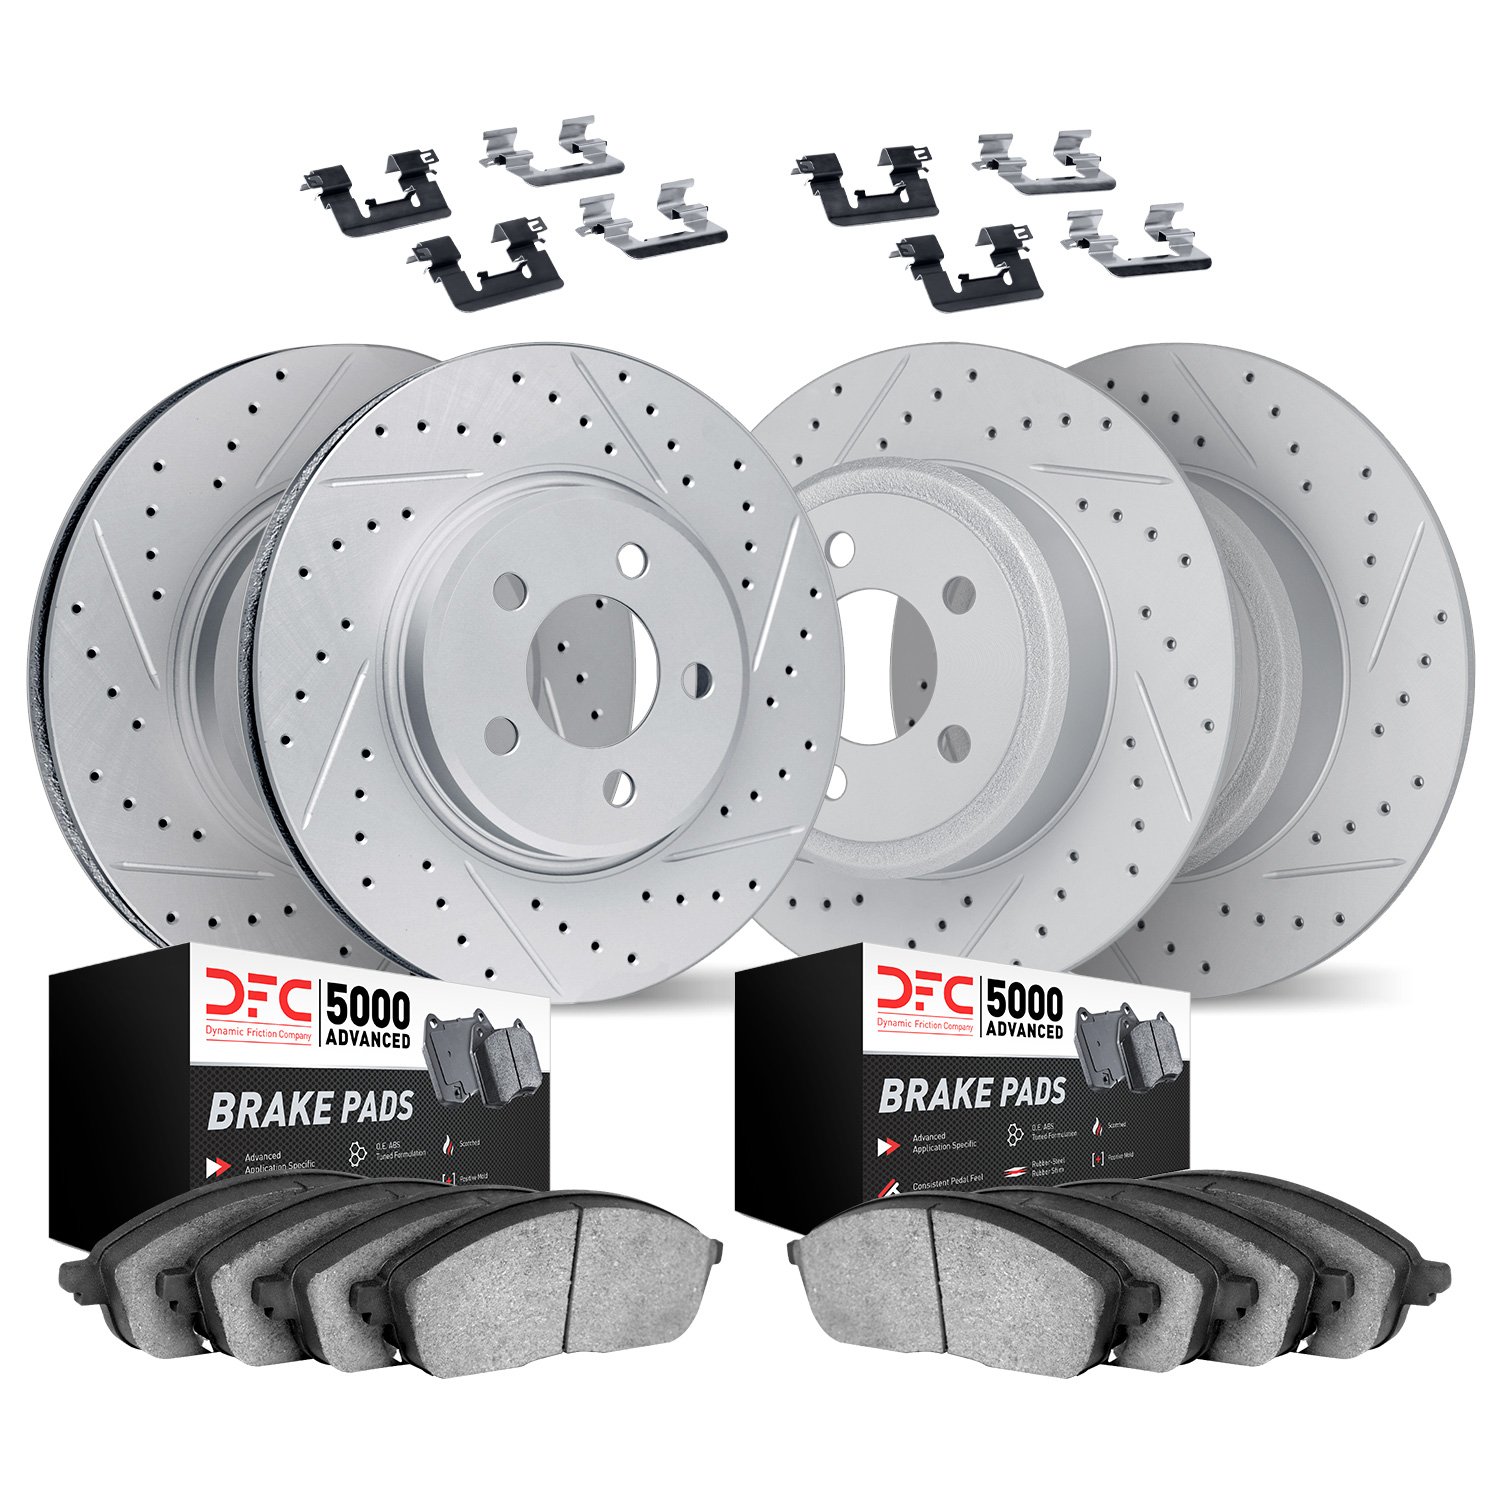 2514-63000 Geoperformance Drilled/Slotted Rotors w/5000 Advanced Brake Pads Kit & Hardware, 2003-2009 Mercedes-Benz, Position: F